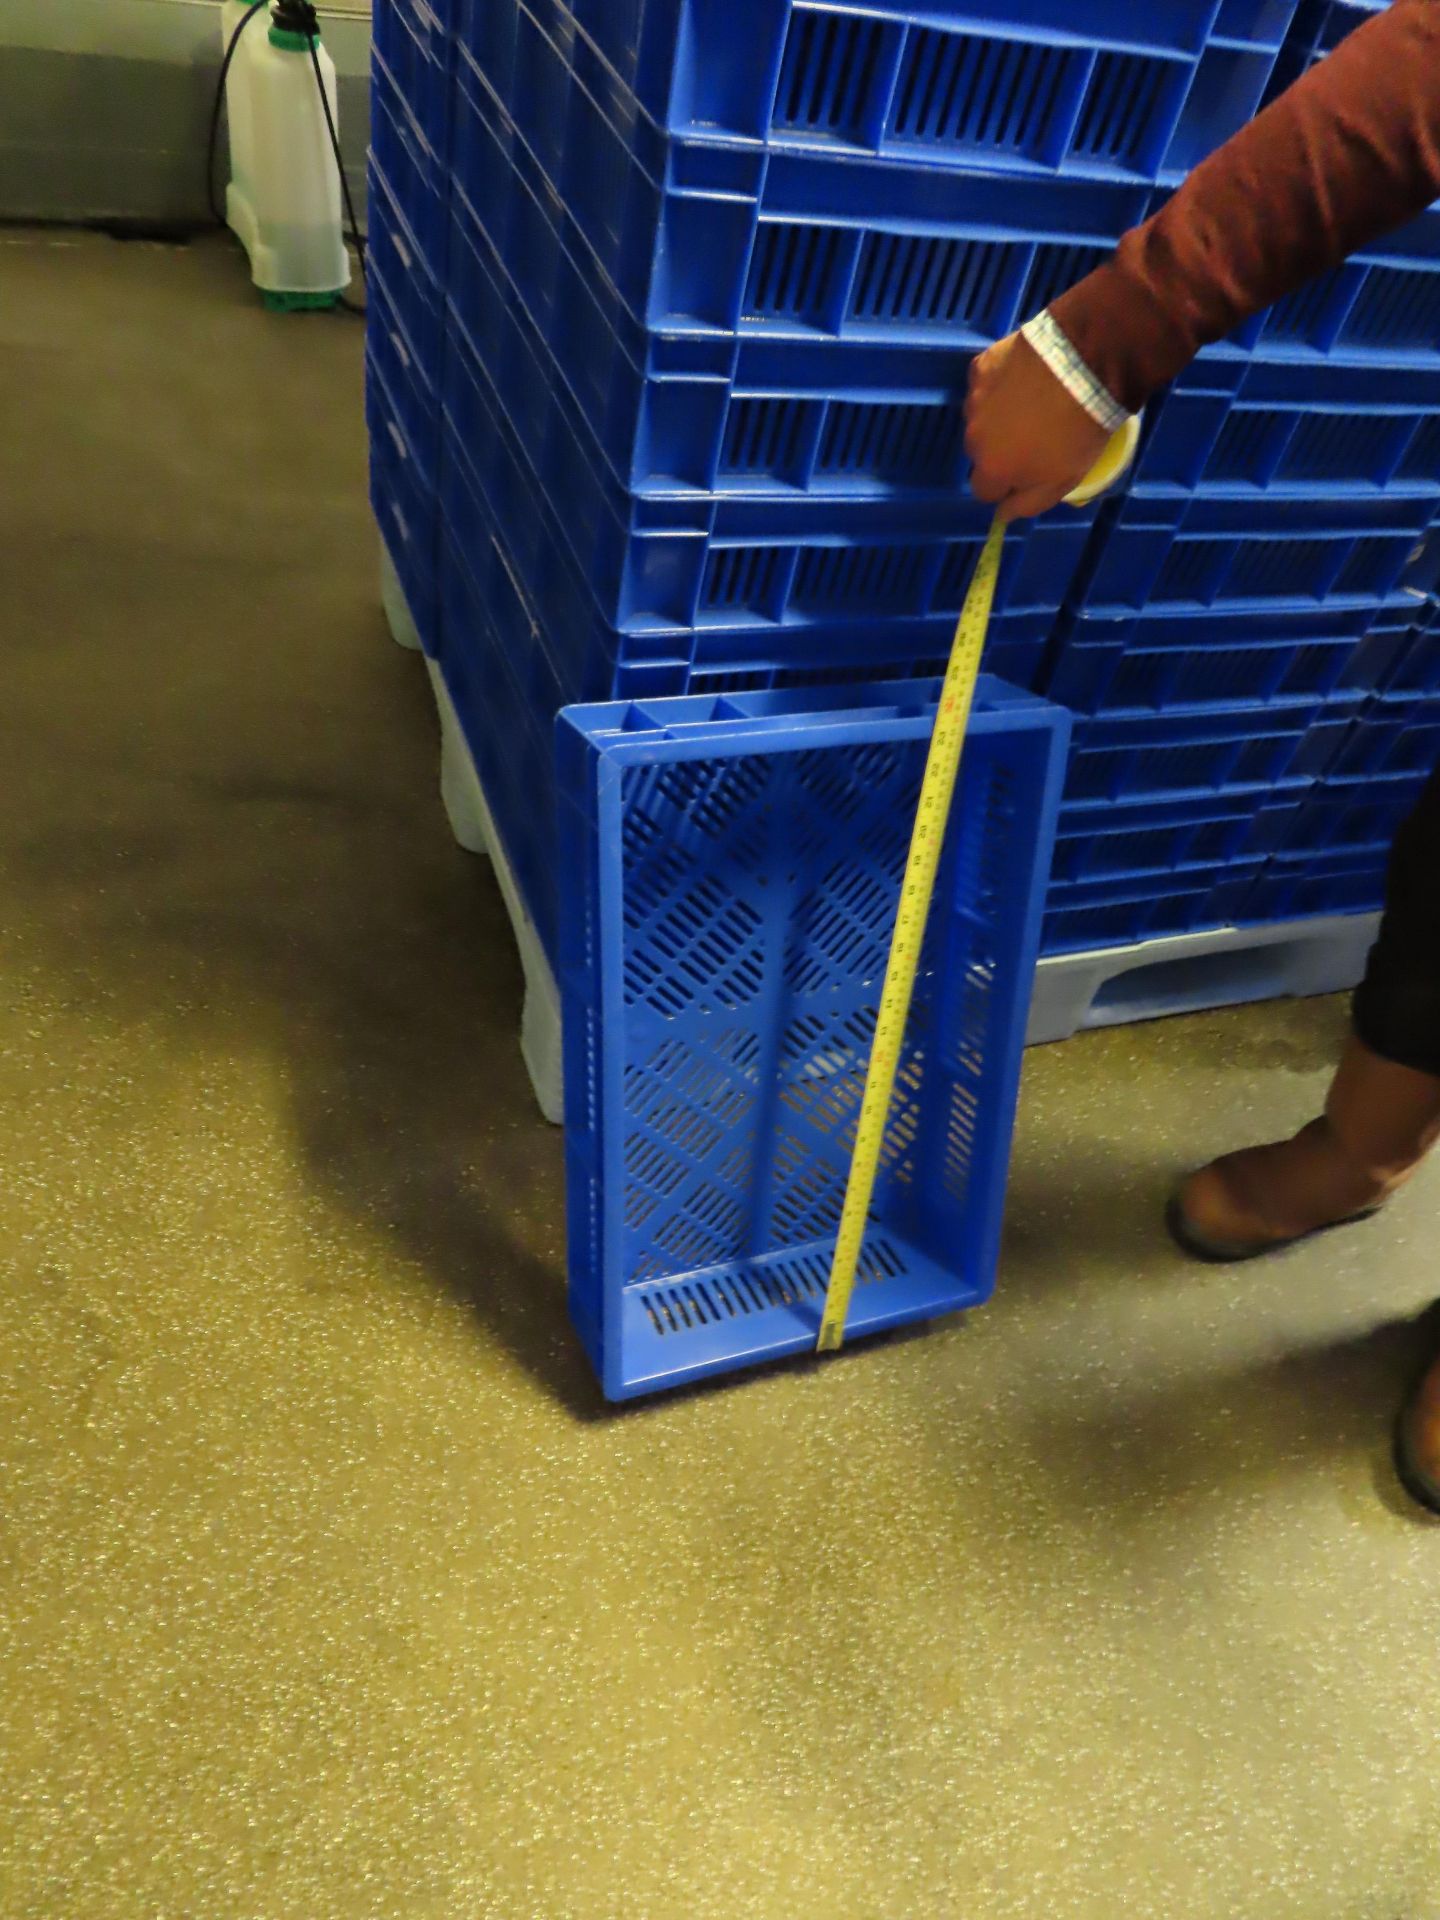 6 X PALLETS OF TRAYS (APPROX. 80 BLUE TRAYS ON EACH PALLET). - Image 2 of 6